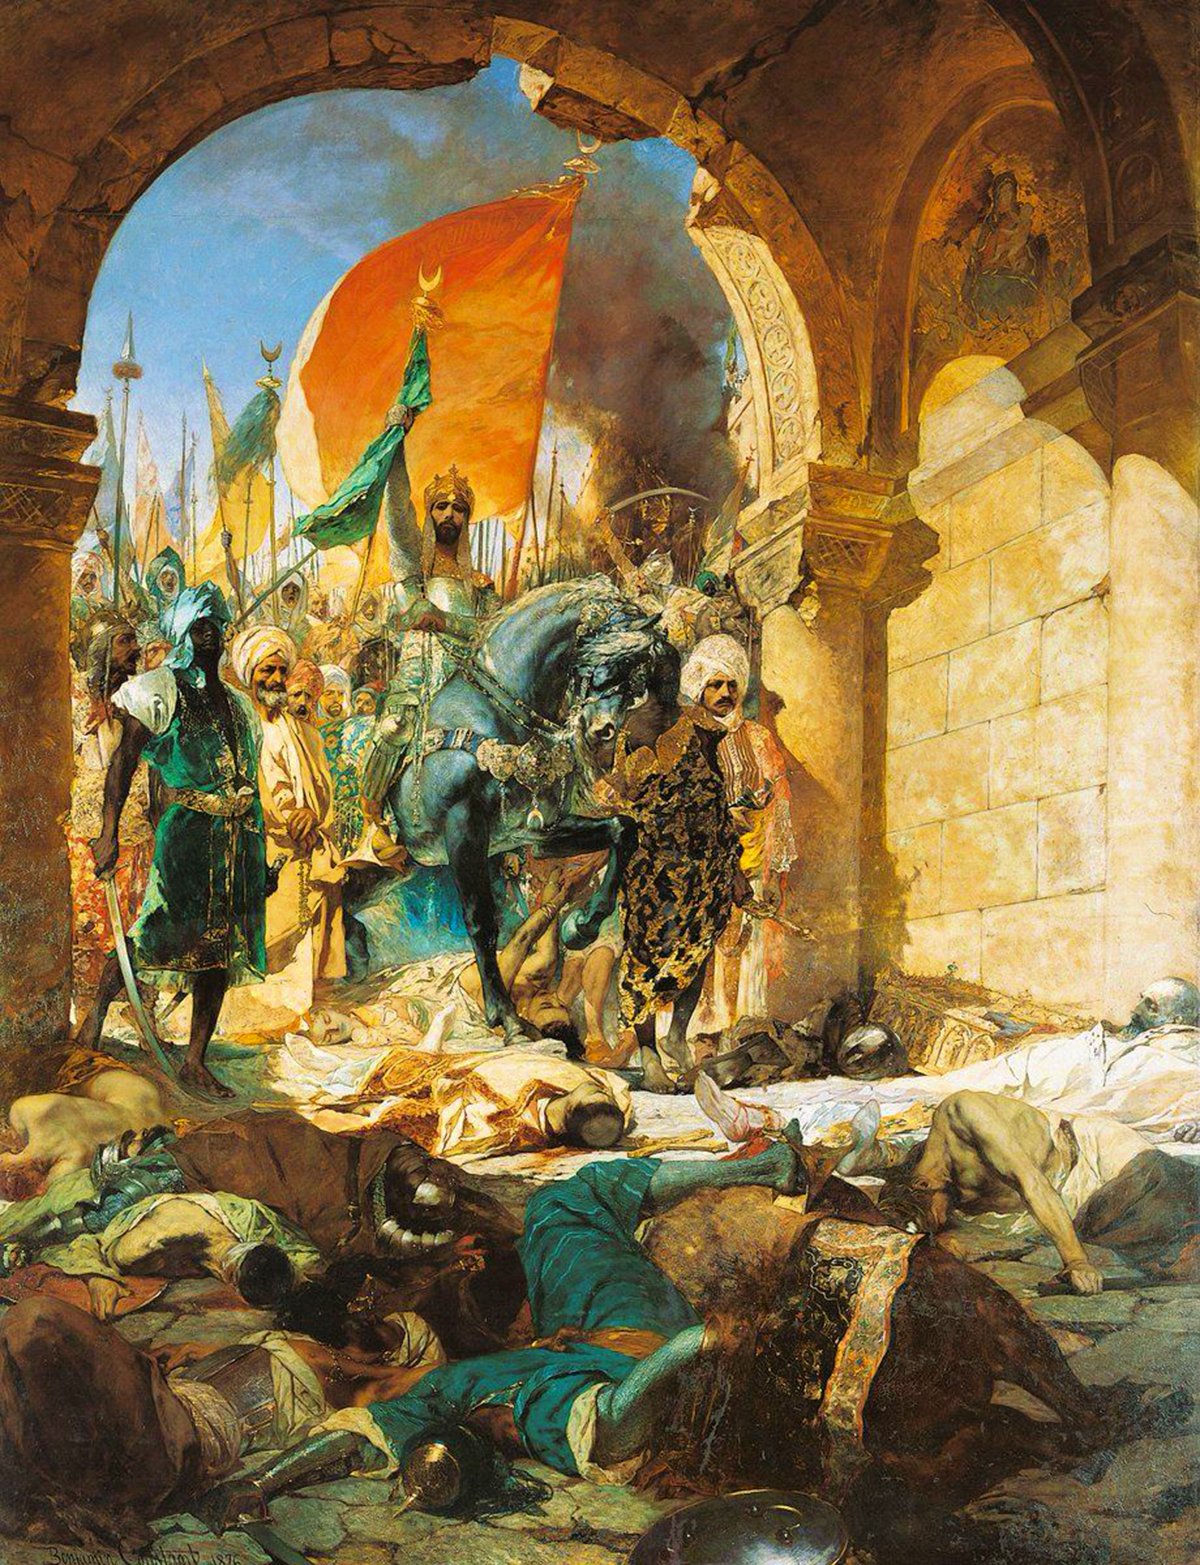 A vivid painting depicting the triumphant entry of Sultan Mehmed II into Constantinople. The sultan, mounted on a decorated horse, is prominently featured in the center, holding aloft a large red flag adorned with a crescent moon. He is surrounded by his diverse entourage of soldiers, officials, and standard bearers displaying various banners. The setting is an ornate archway of the city's gates, with architectural details and remnants of Christian artwork. The aftermath of the conquest is evident, with fallen soldiers, debris, and smoke in the background, highlighting the dramatic change of power and era in the city's history.